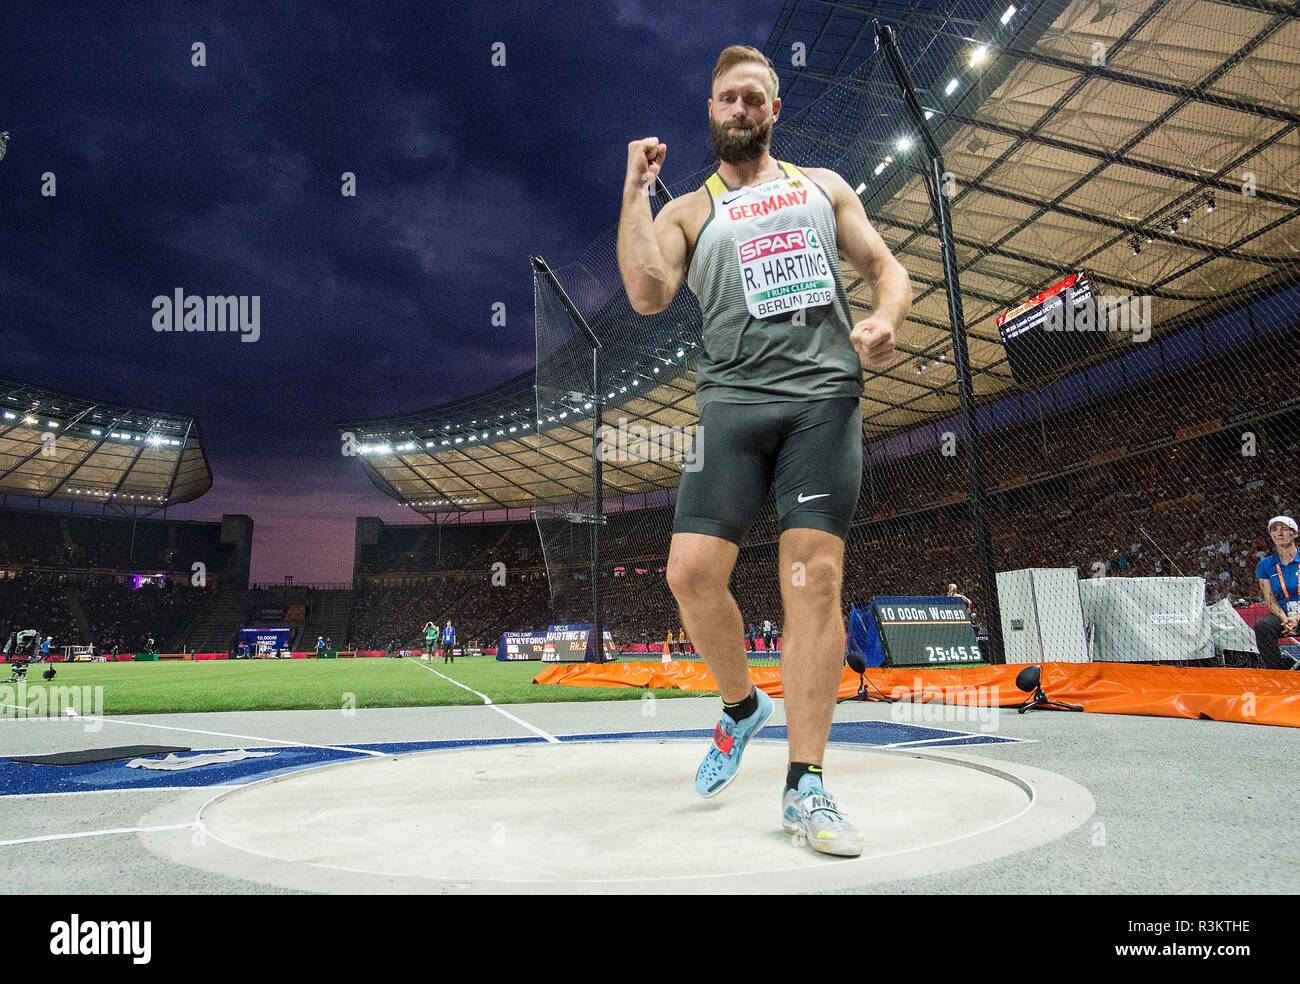 Berlin, Deutschland. 08th Aug, 2018. jubilation Robert HARTING, Germany,  6th place, in the Olympic Stadium. Discus final of the men, on 08.08.2018  European Athletics Championships 2018 in Berlin/Germany from 06.08. - 12.08. 2018.